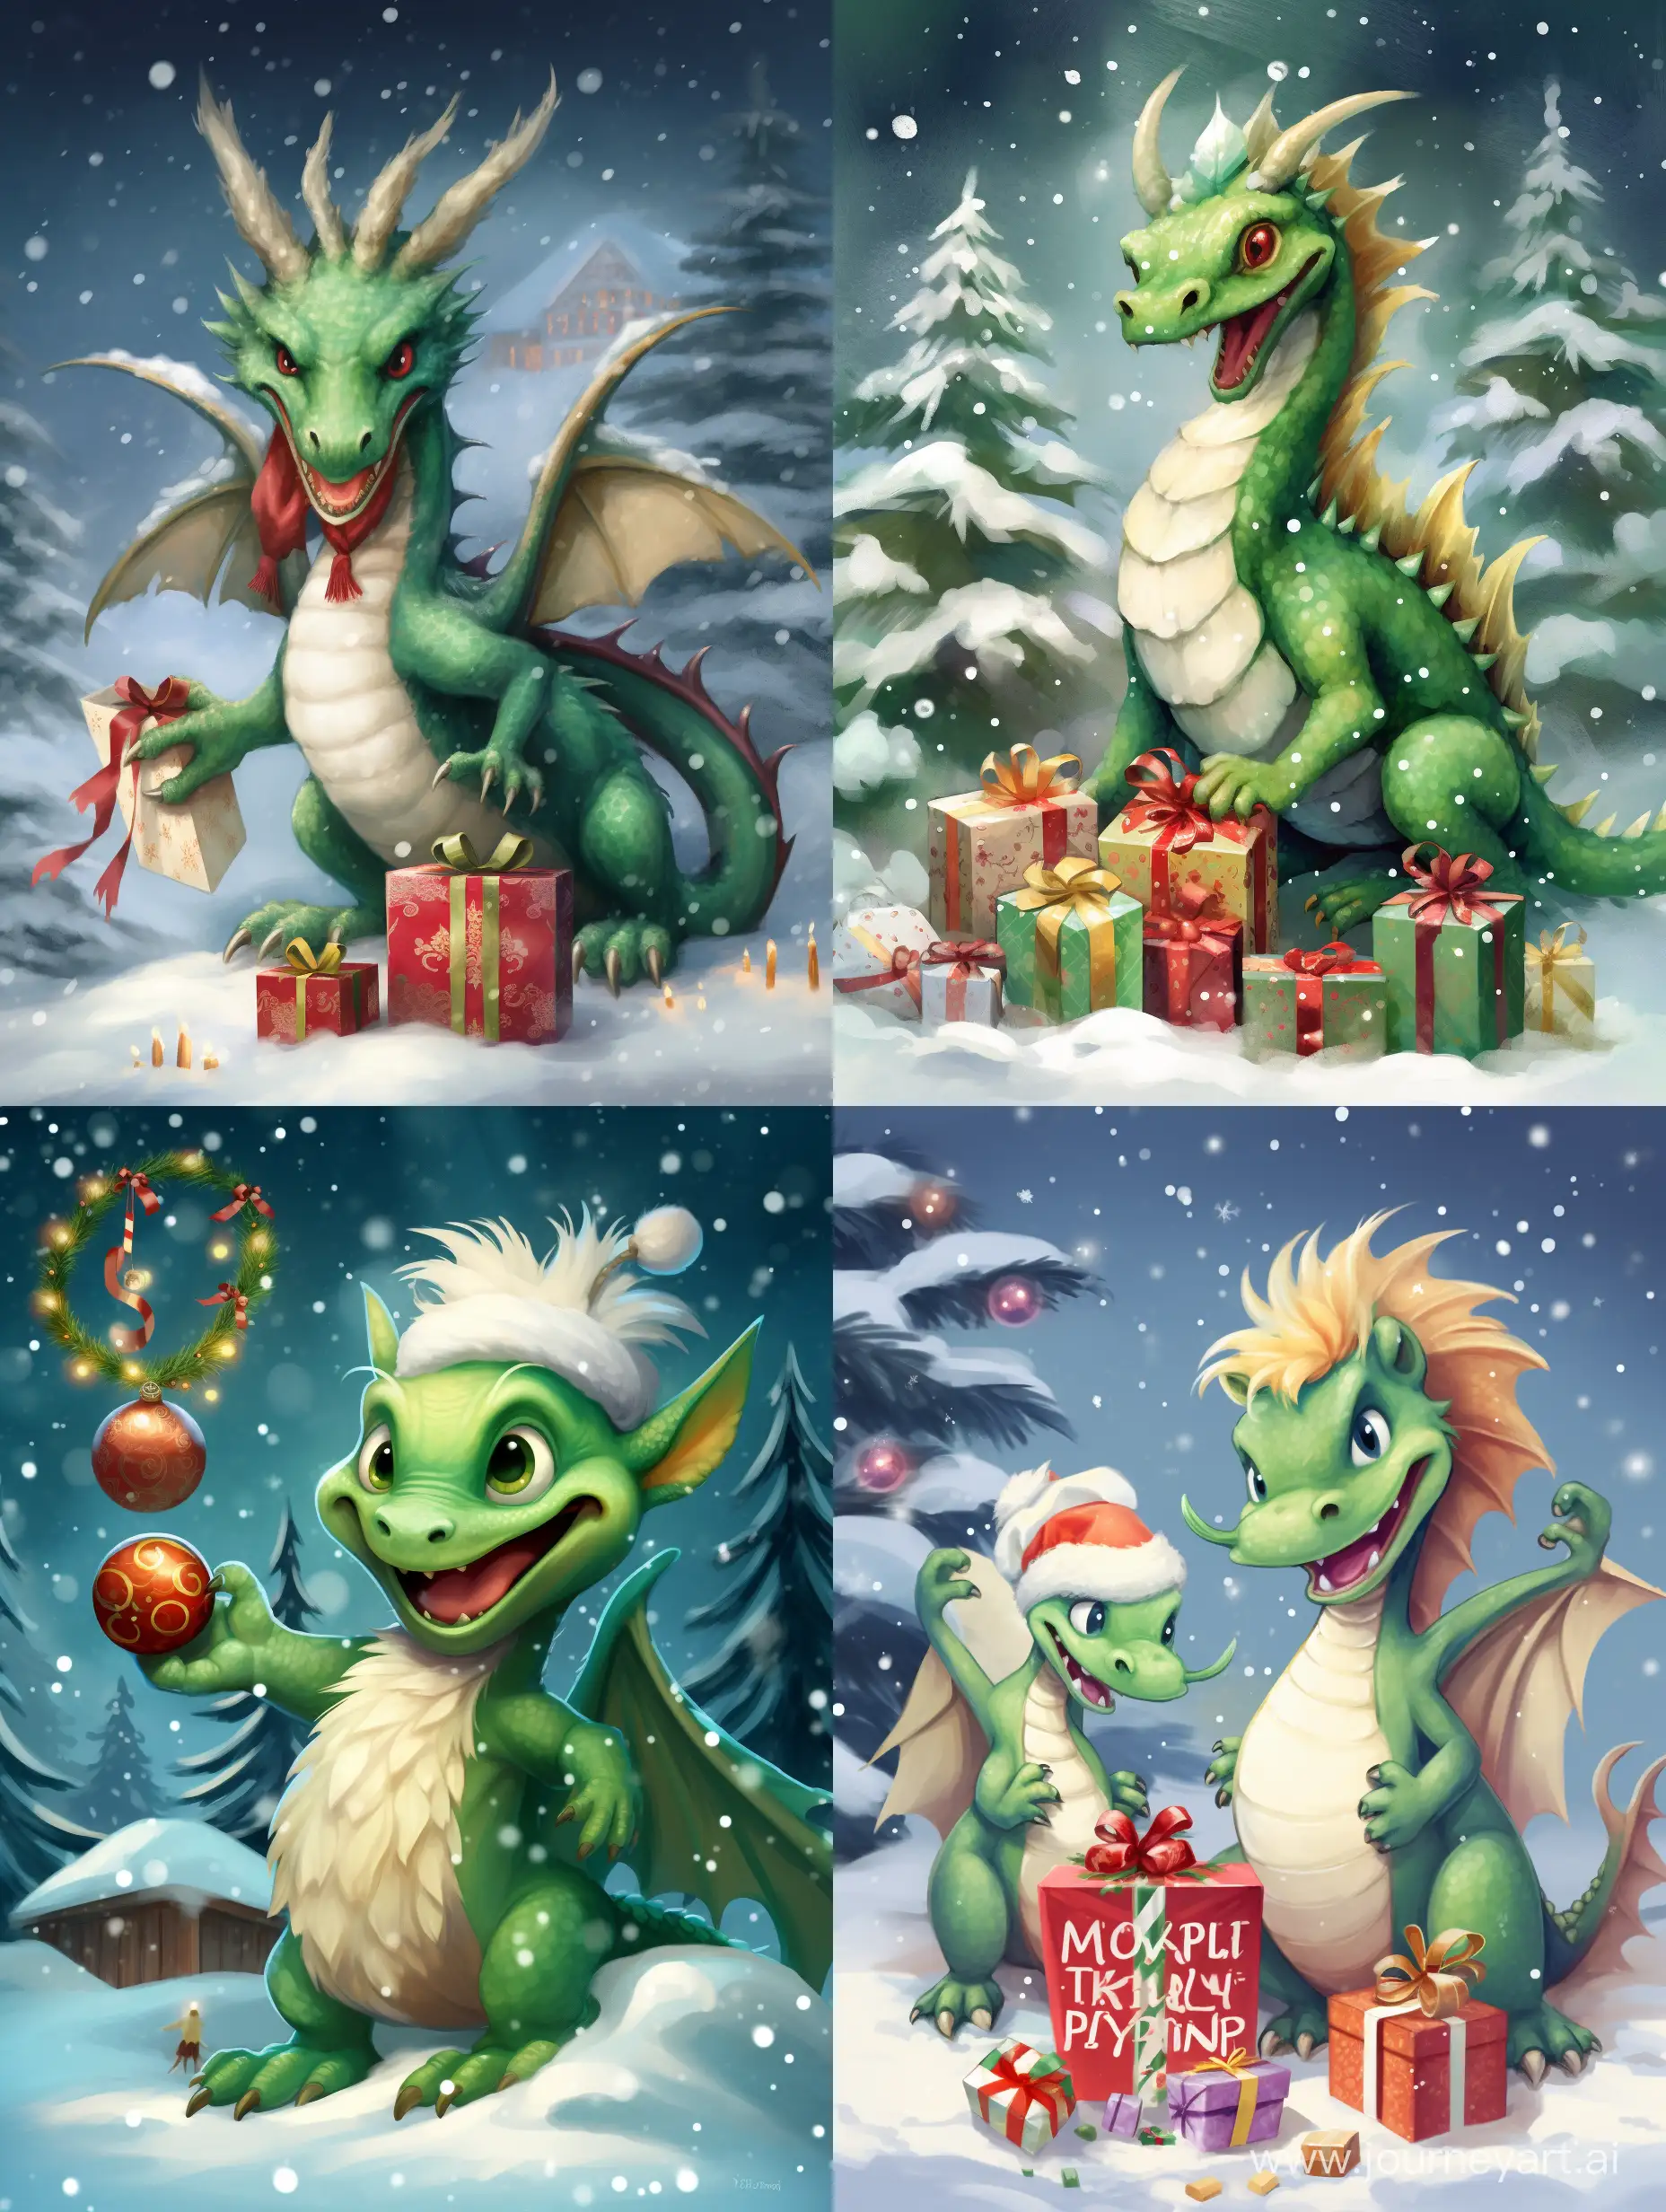 Festive-Dragon-Wishing-Happy-New-Year-with-Snow-and-Christmas-Tree